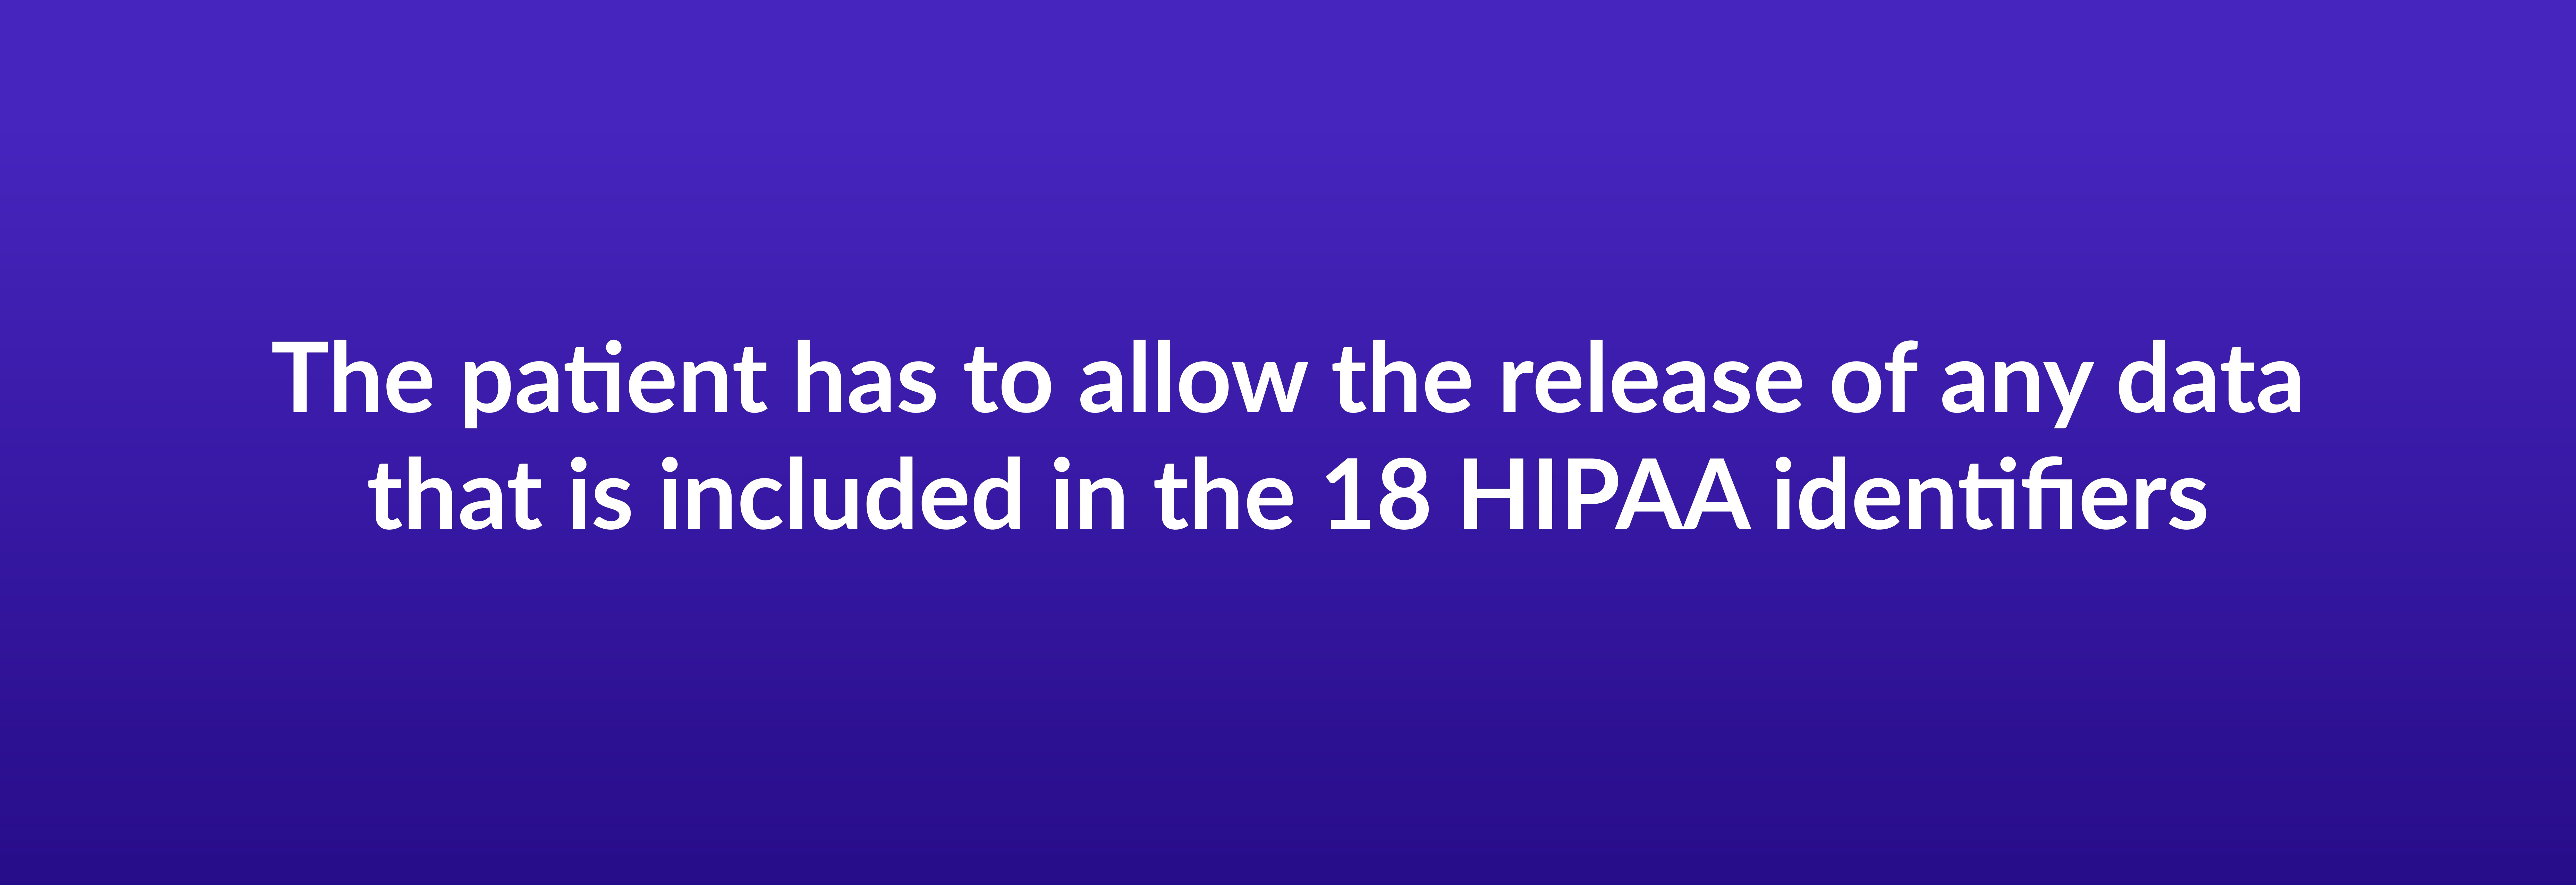 The patient has to allow the release of any data that is included in the 18 HIPAA identifiers